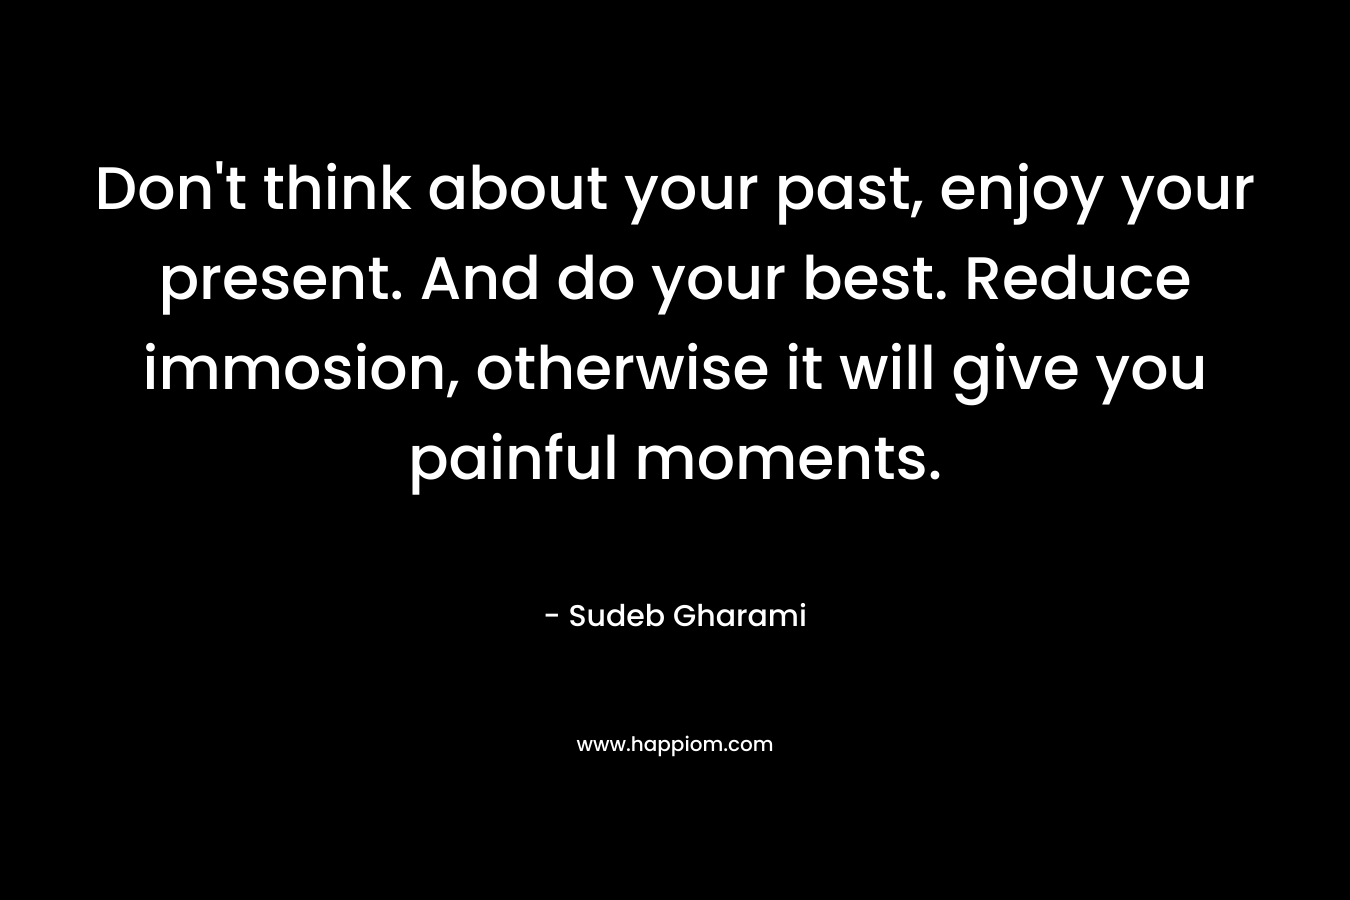 Don't think about your past, enjoy your present. And do your best. Reduce immosion, otherwise it will give you painful moments.